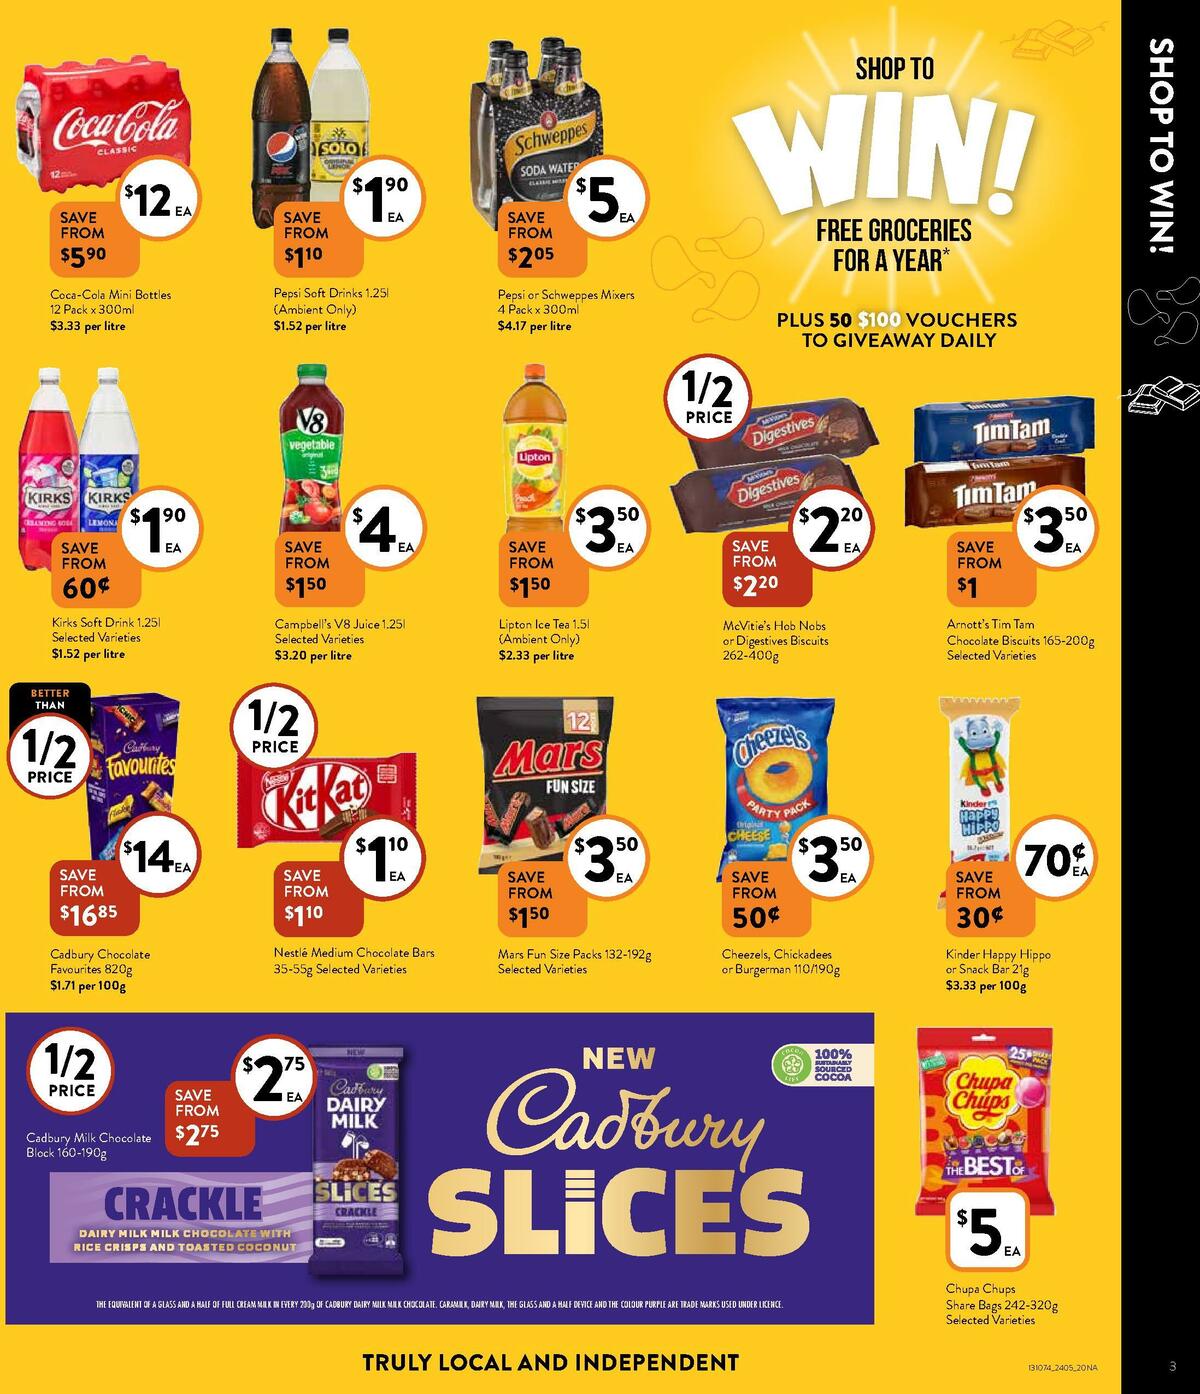 FoodWorks Supermarket Catalogues from 24 May